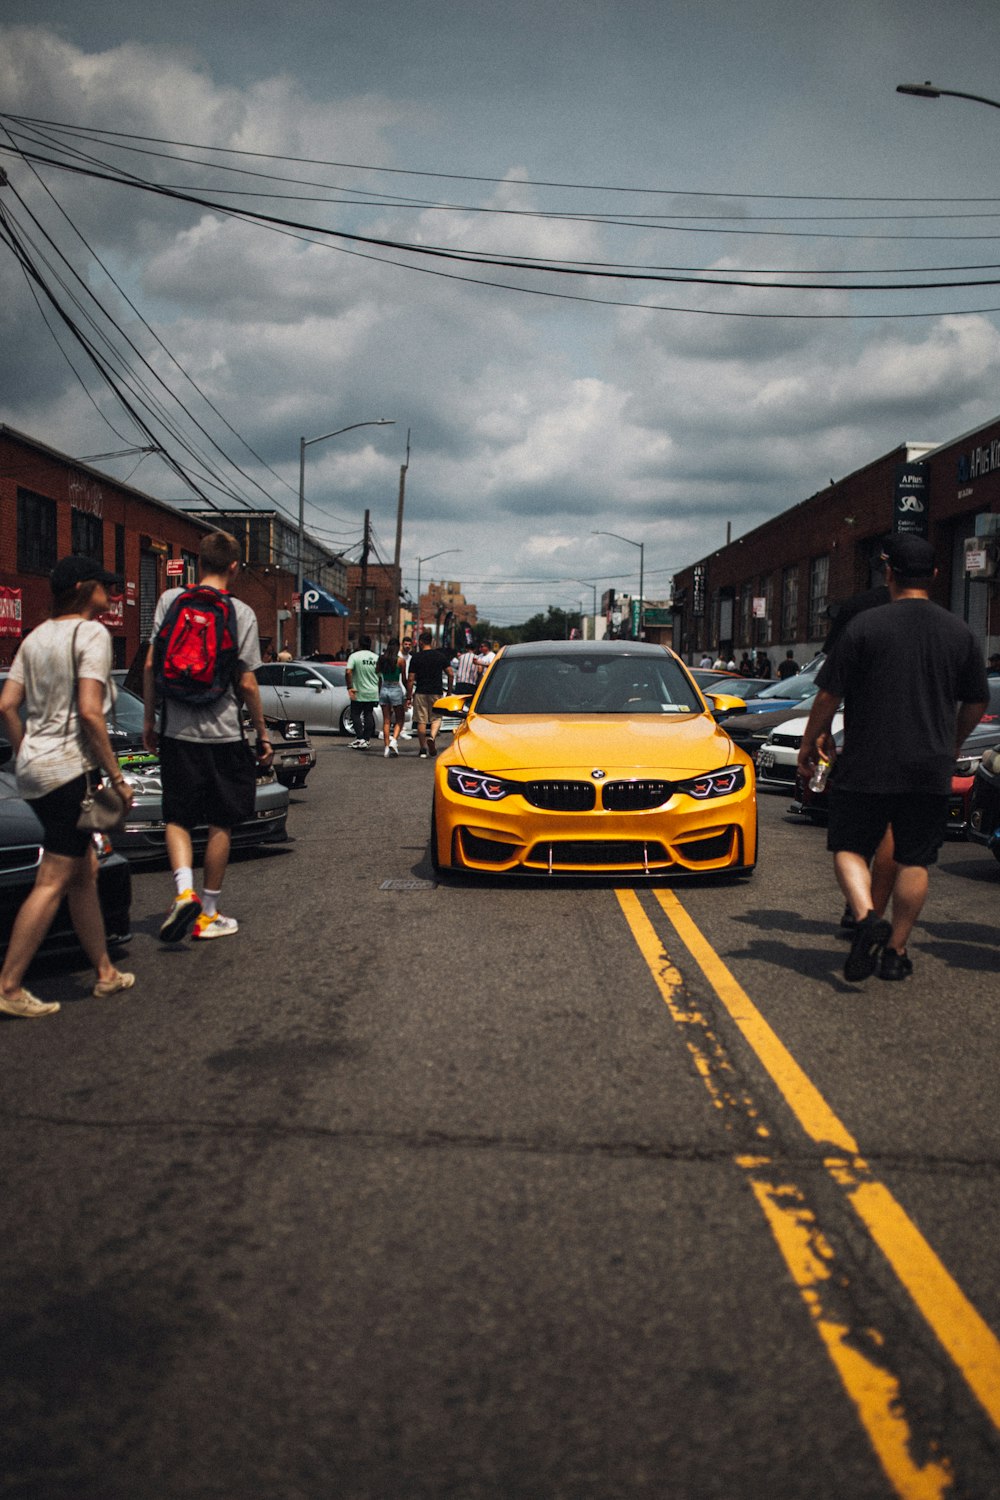 a yellow sports car on a street